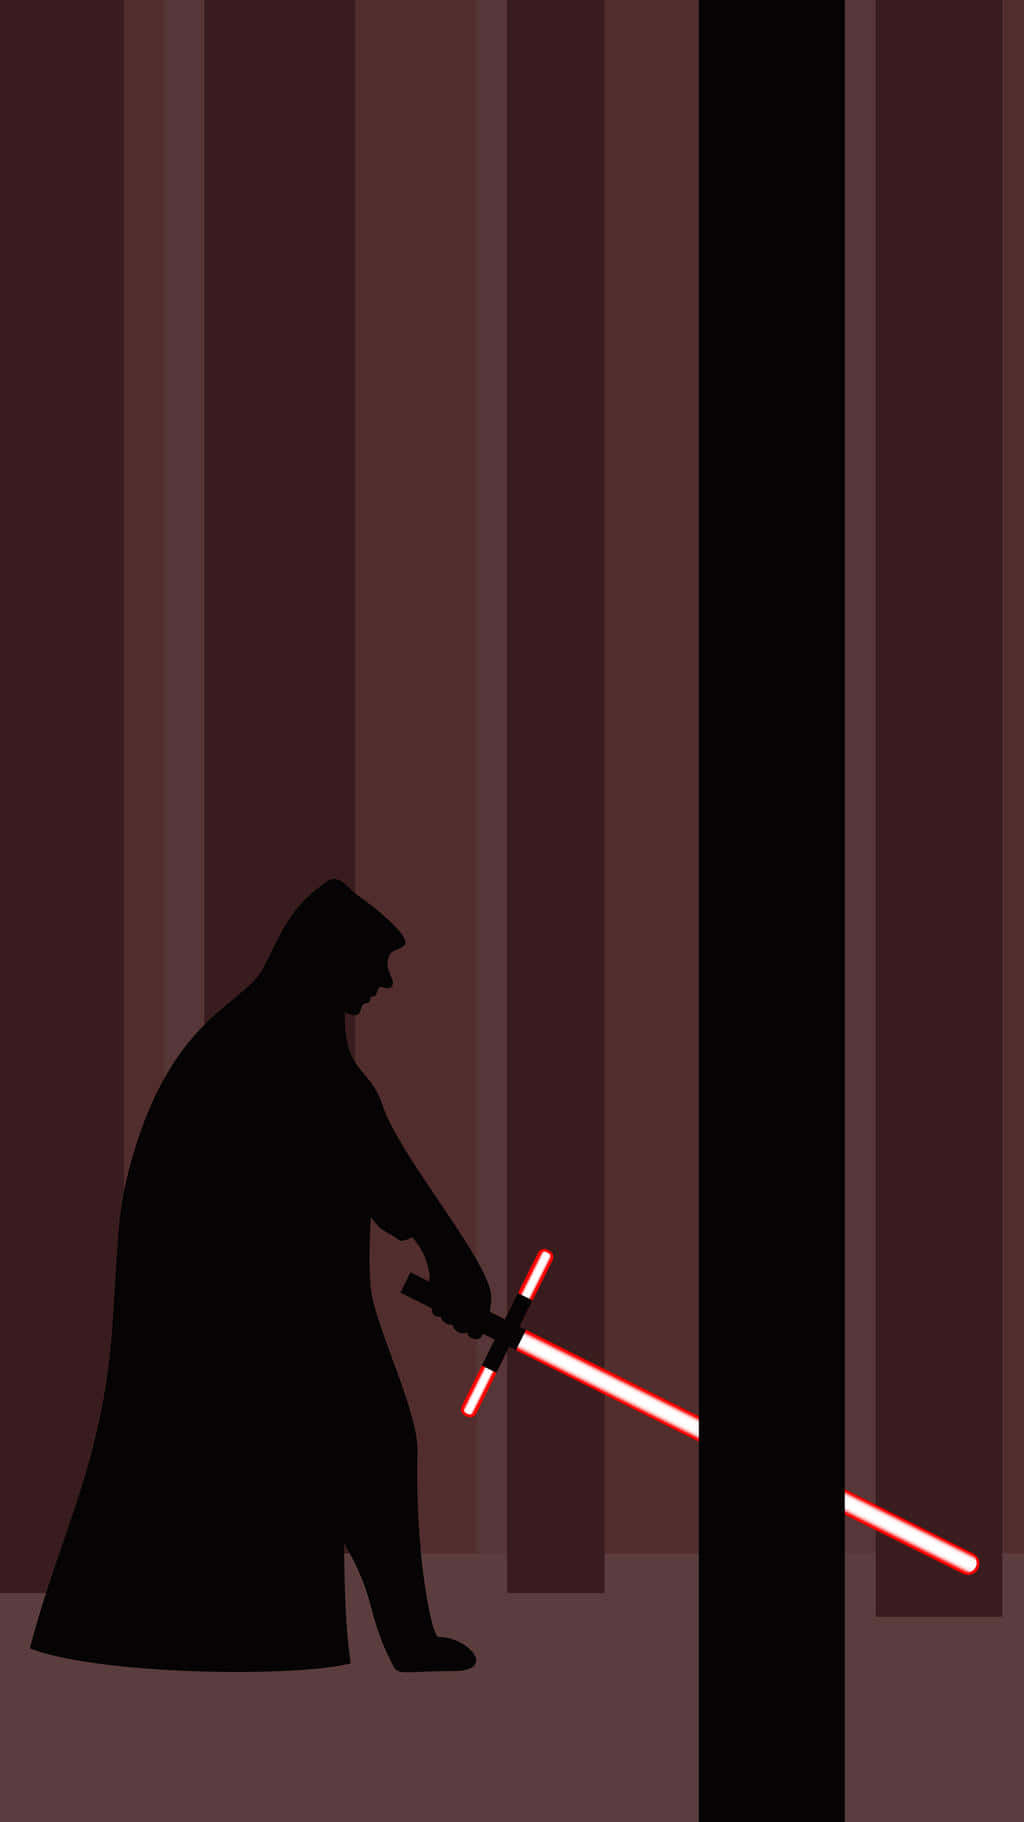 Enter the World of The Star Wars Universe with Kylo Ren's Iphone Wallpaper